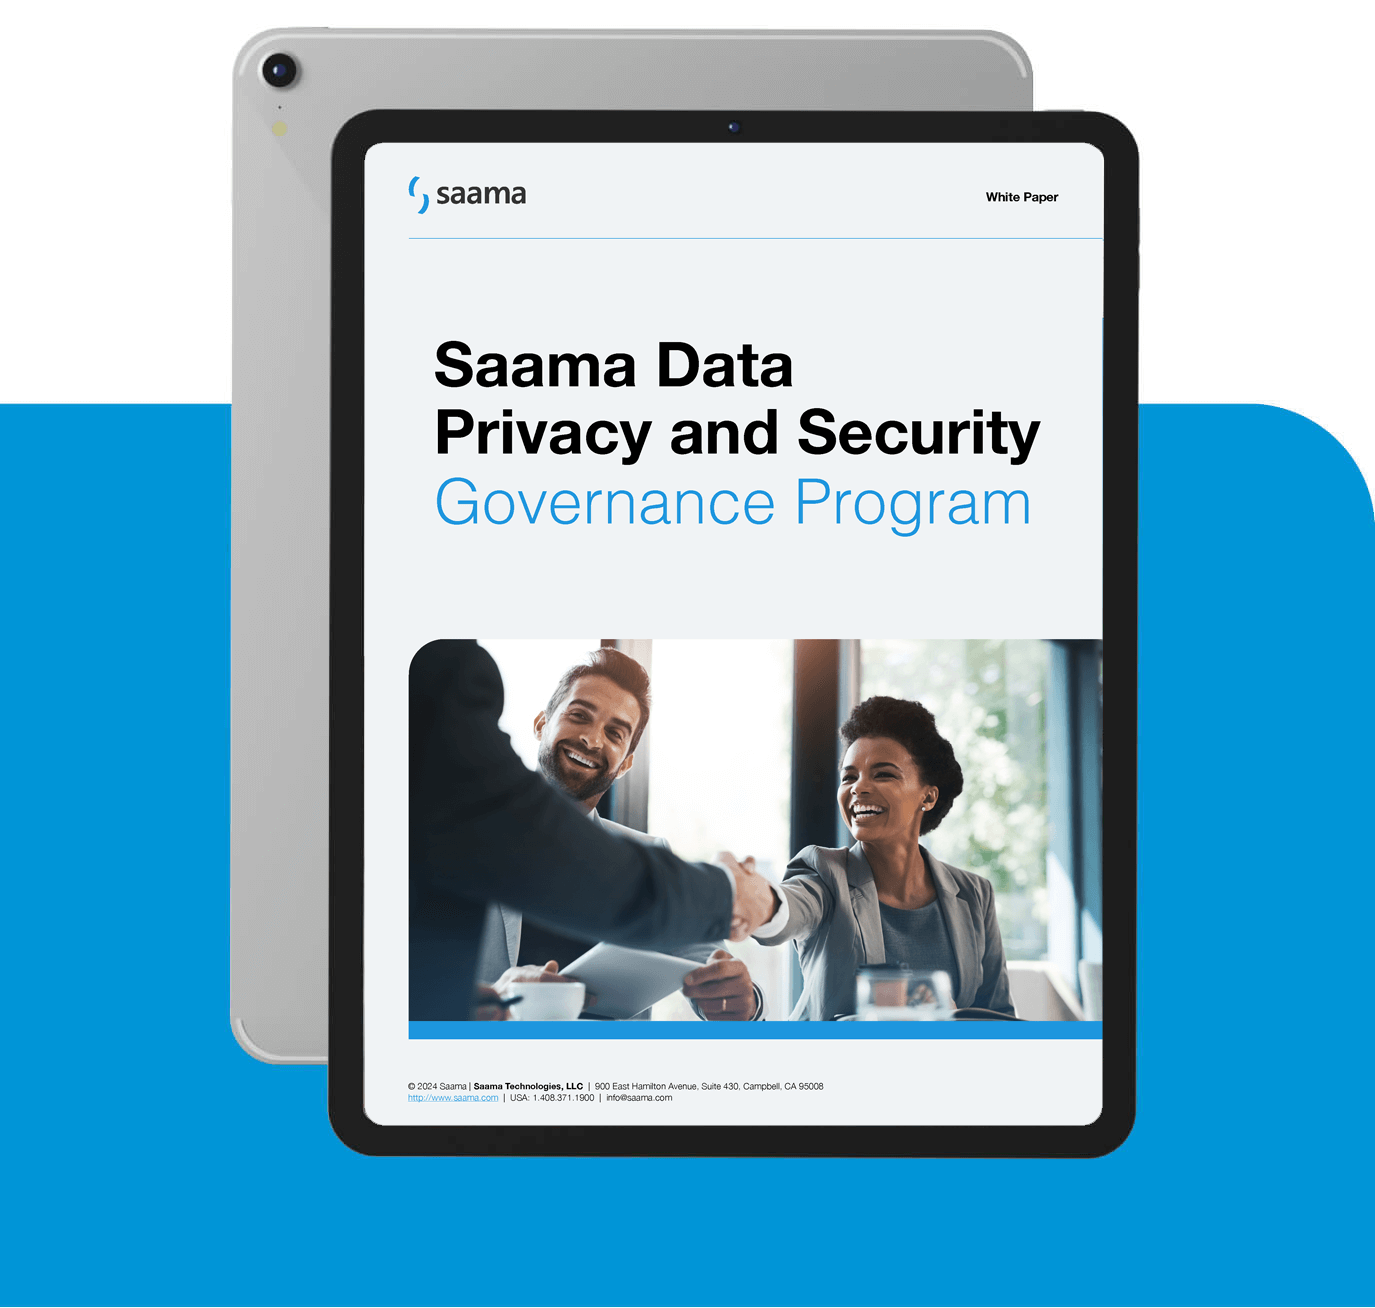 Saama Data Privacy and Security Governance Program